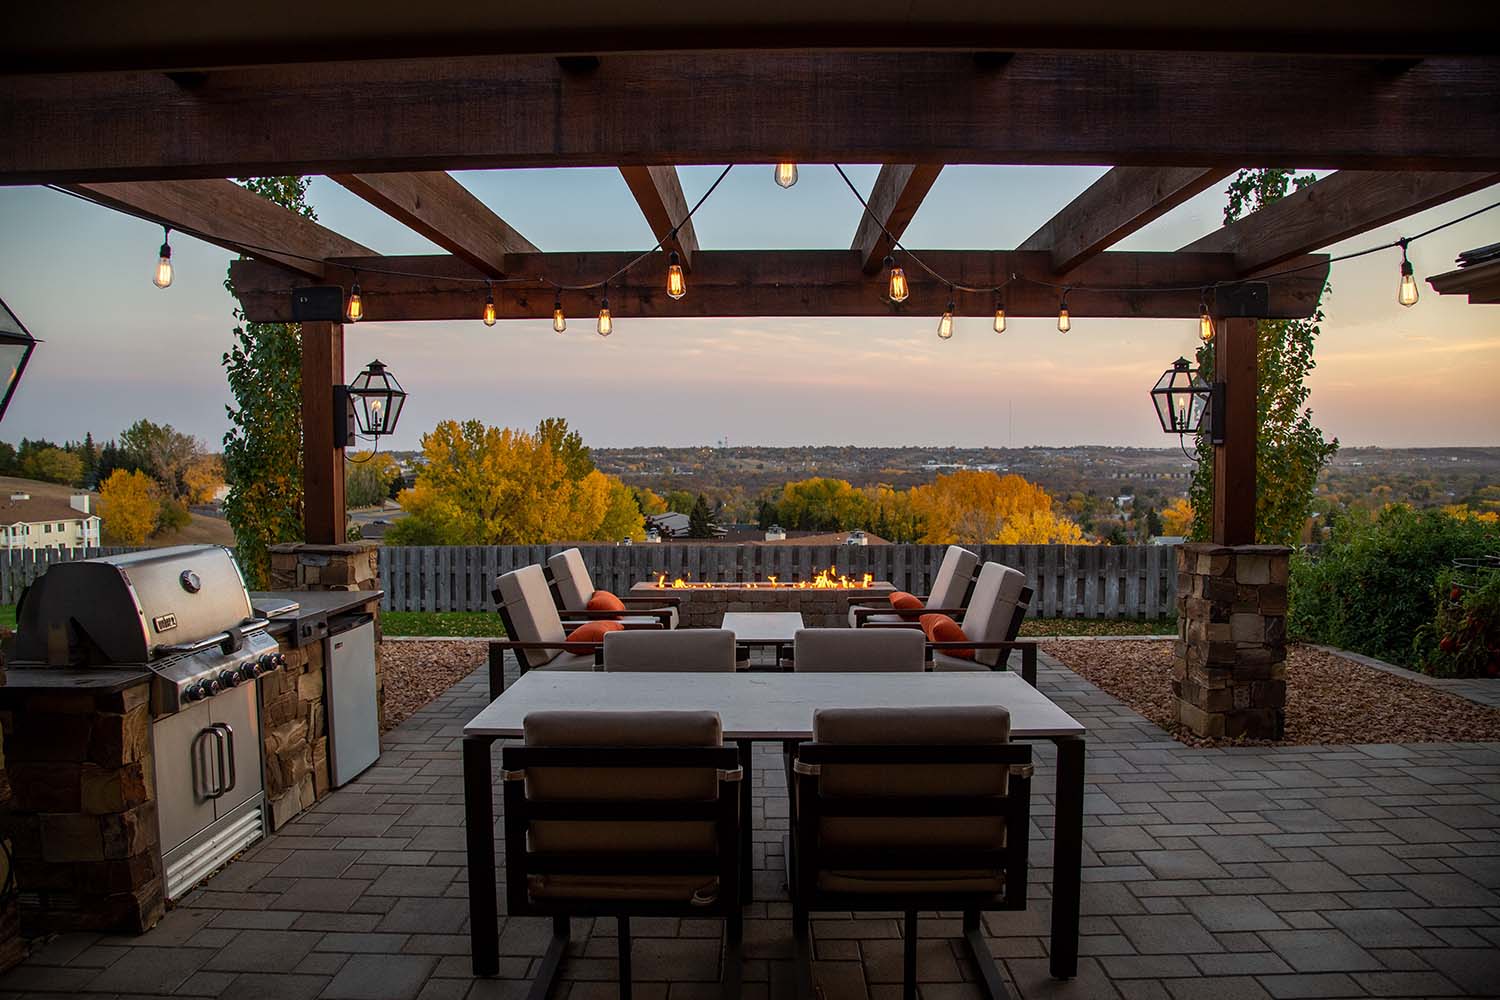 What Makes A Great Patio Design?